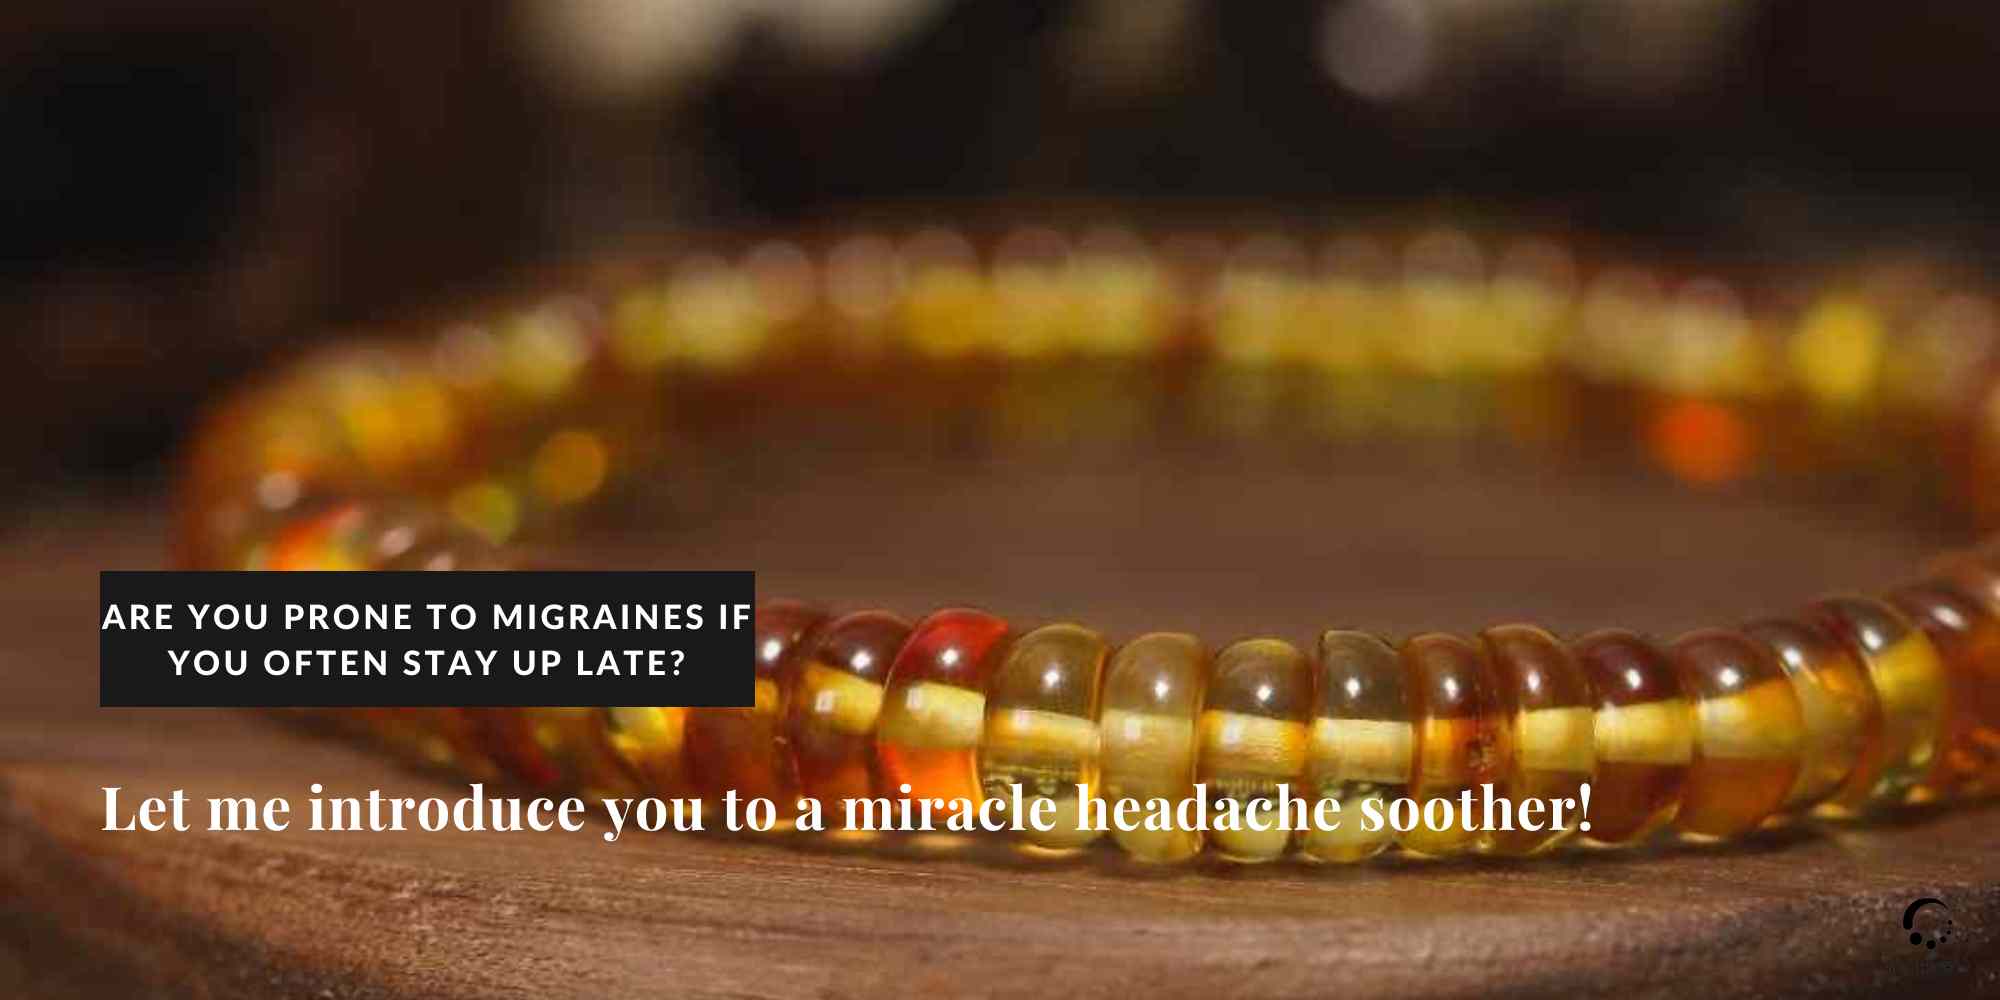 Are you prone to migraines if you often stay up late? Let me introduce you to a miracle headache soother!